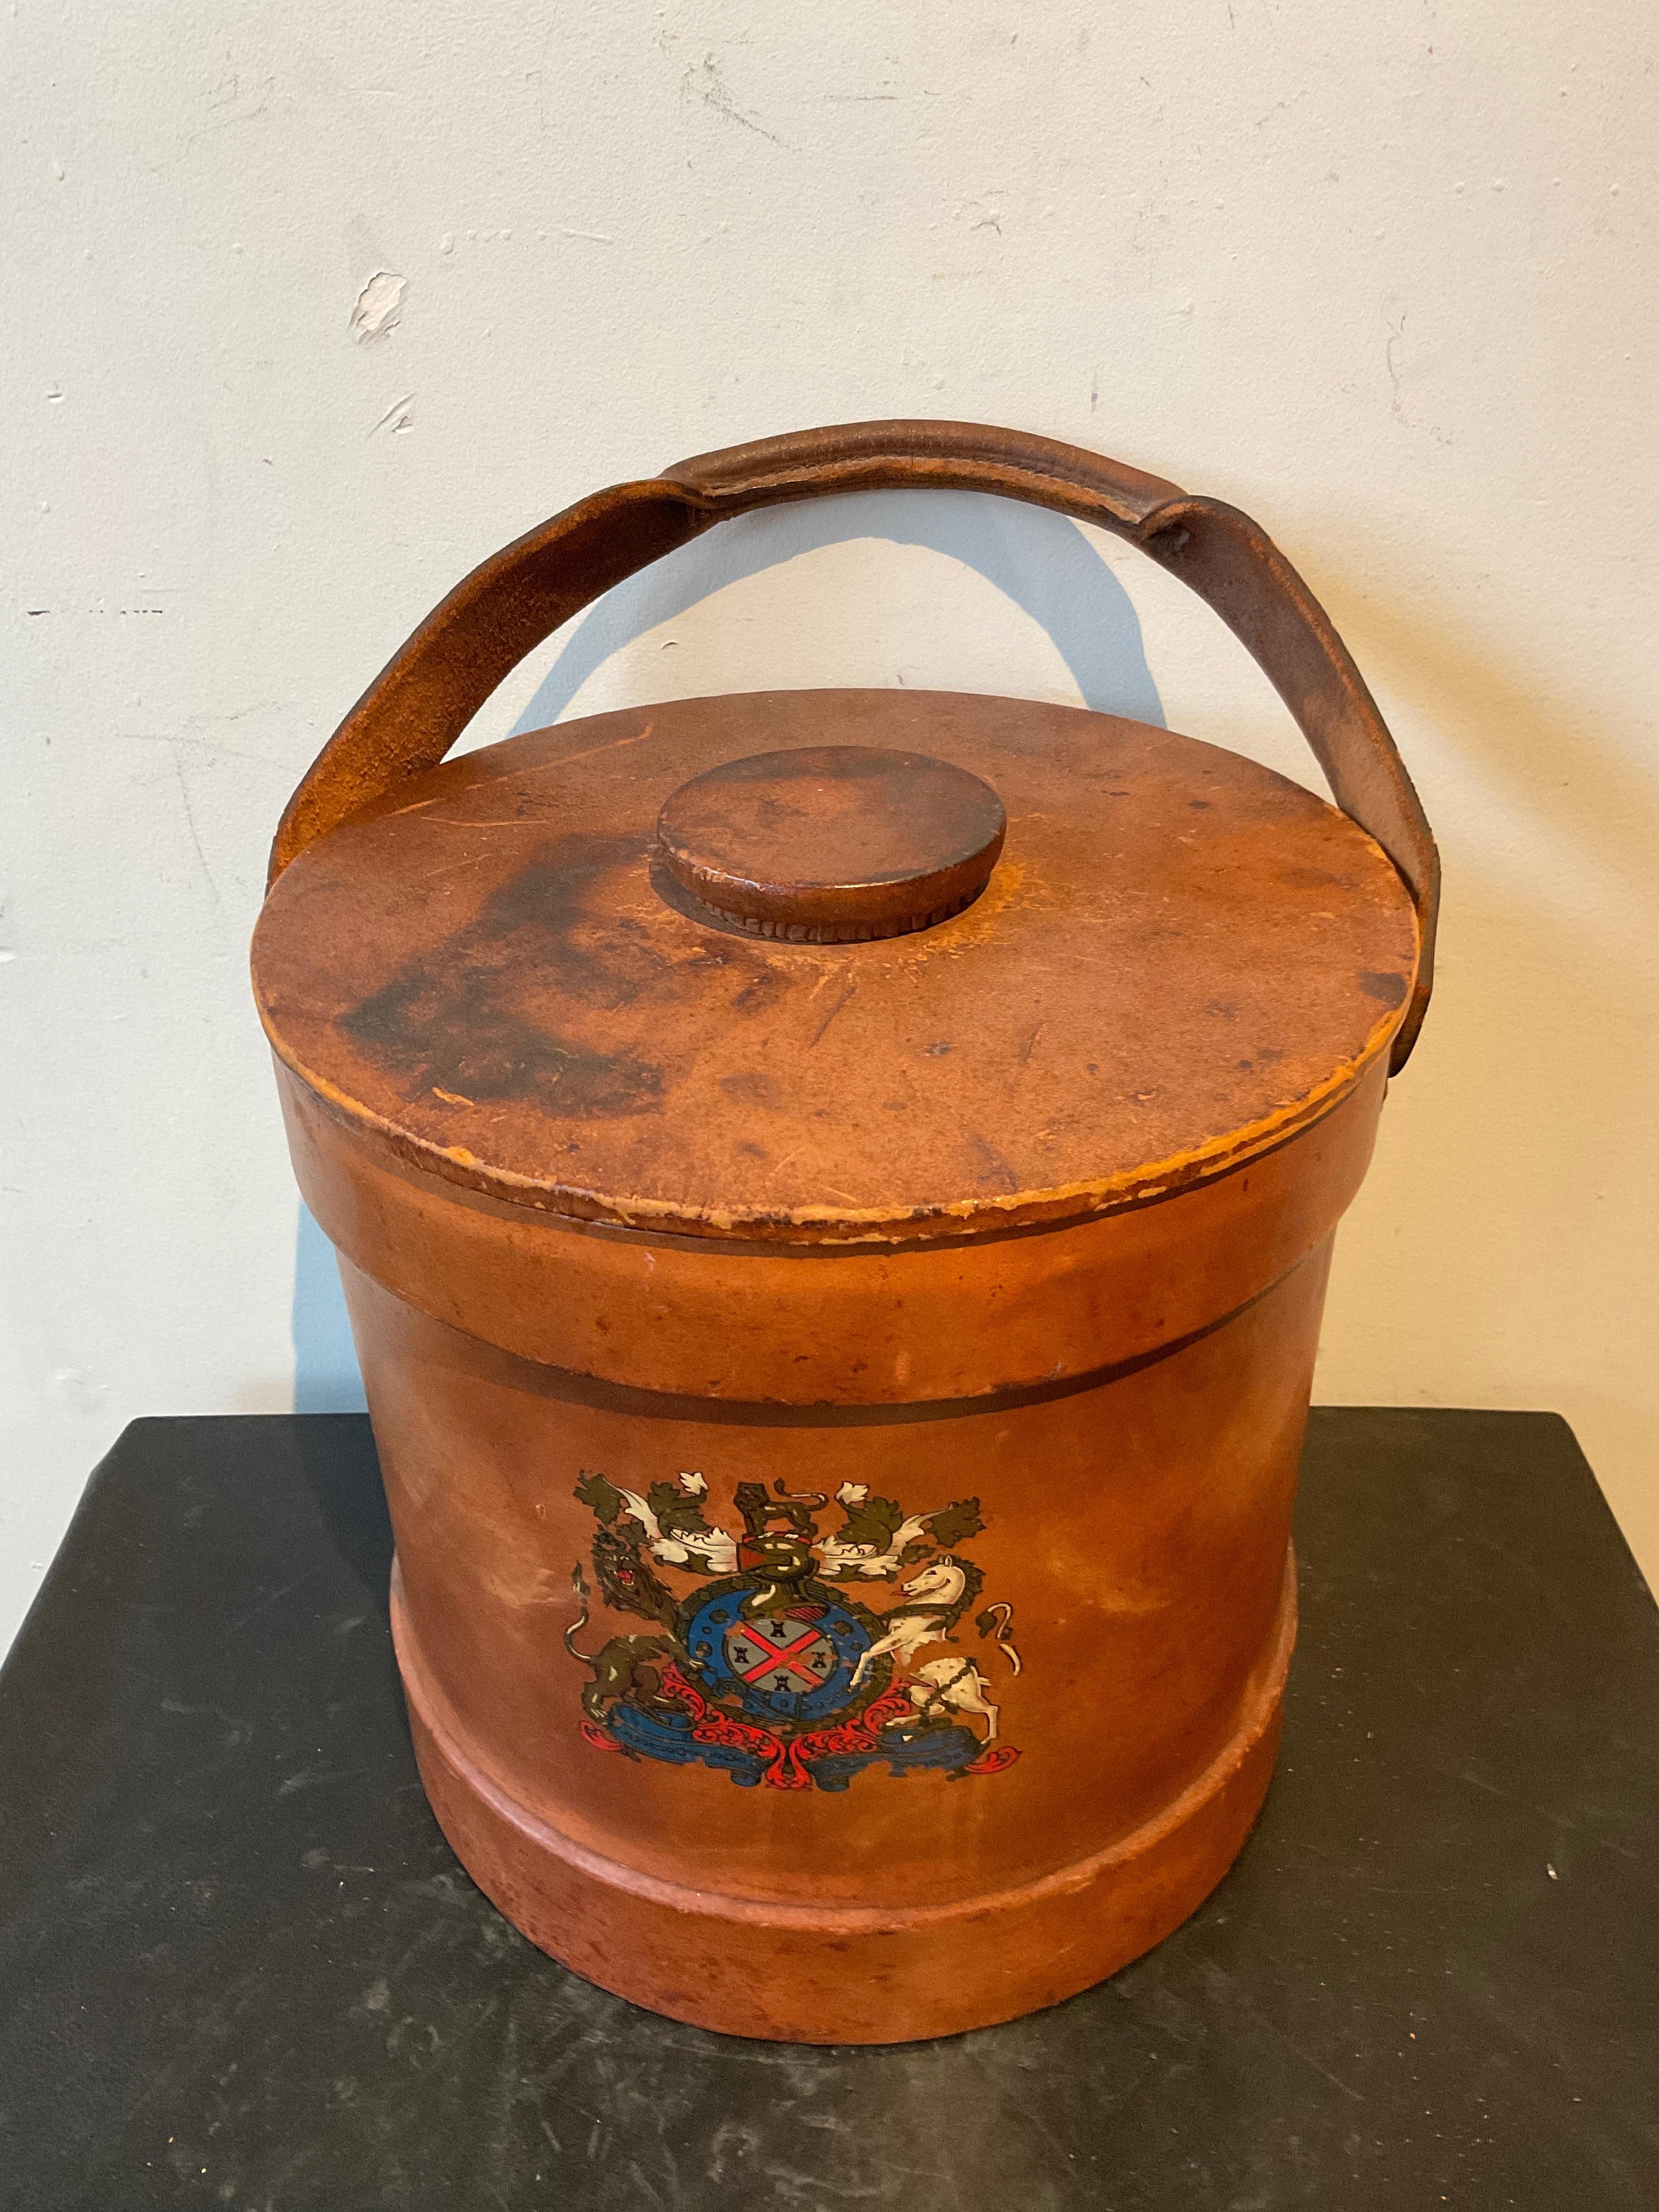 1880s English army artillery shell converted into an ice bucket.